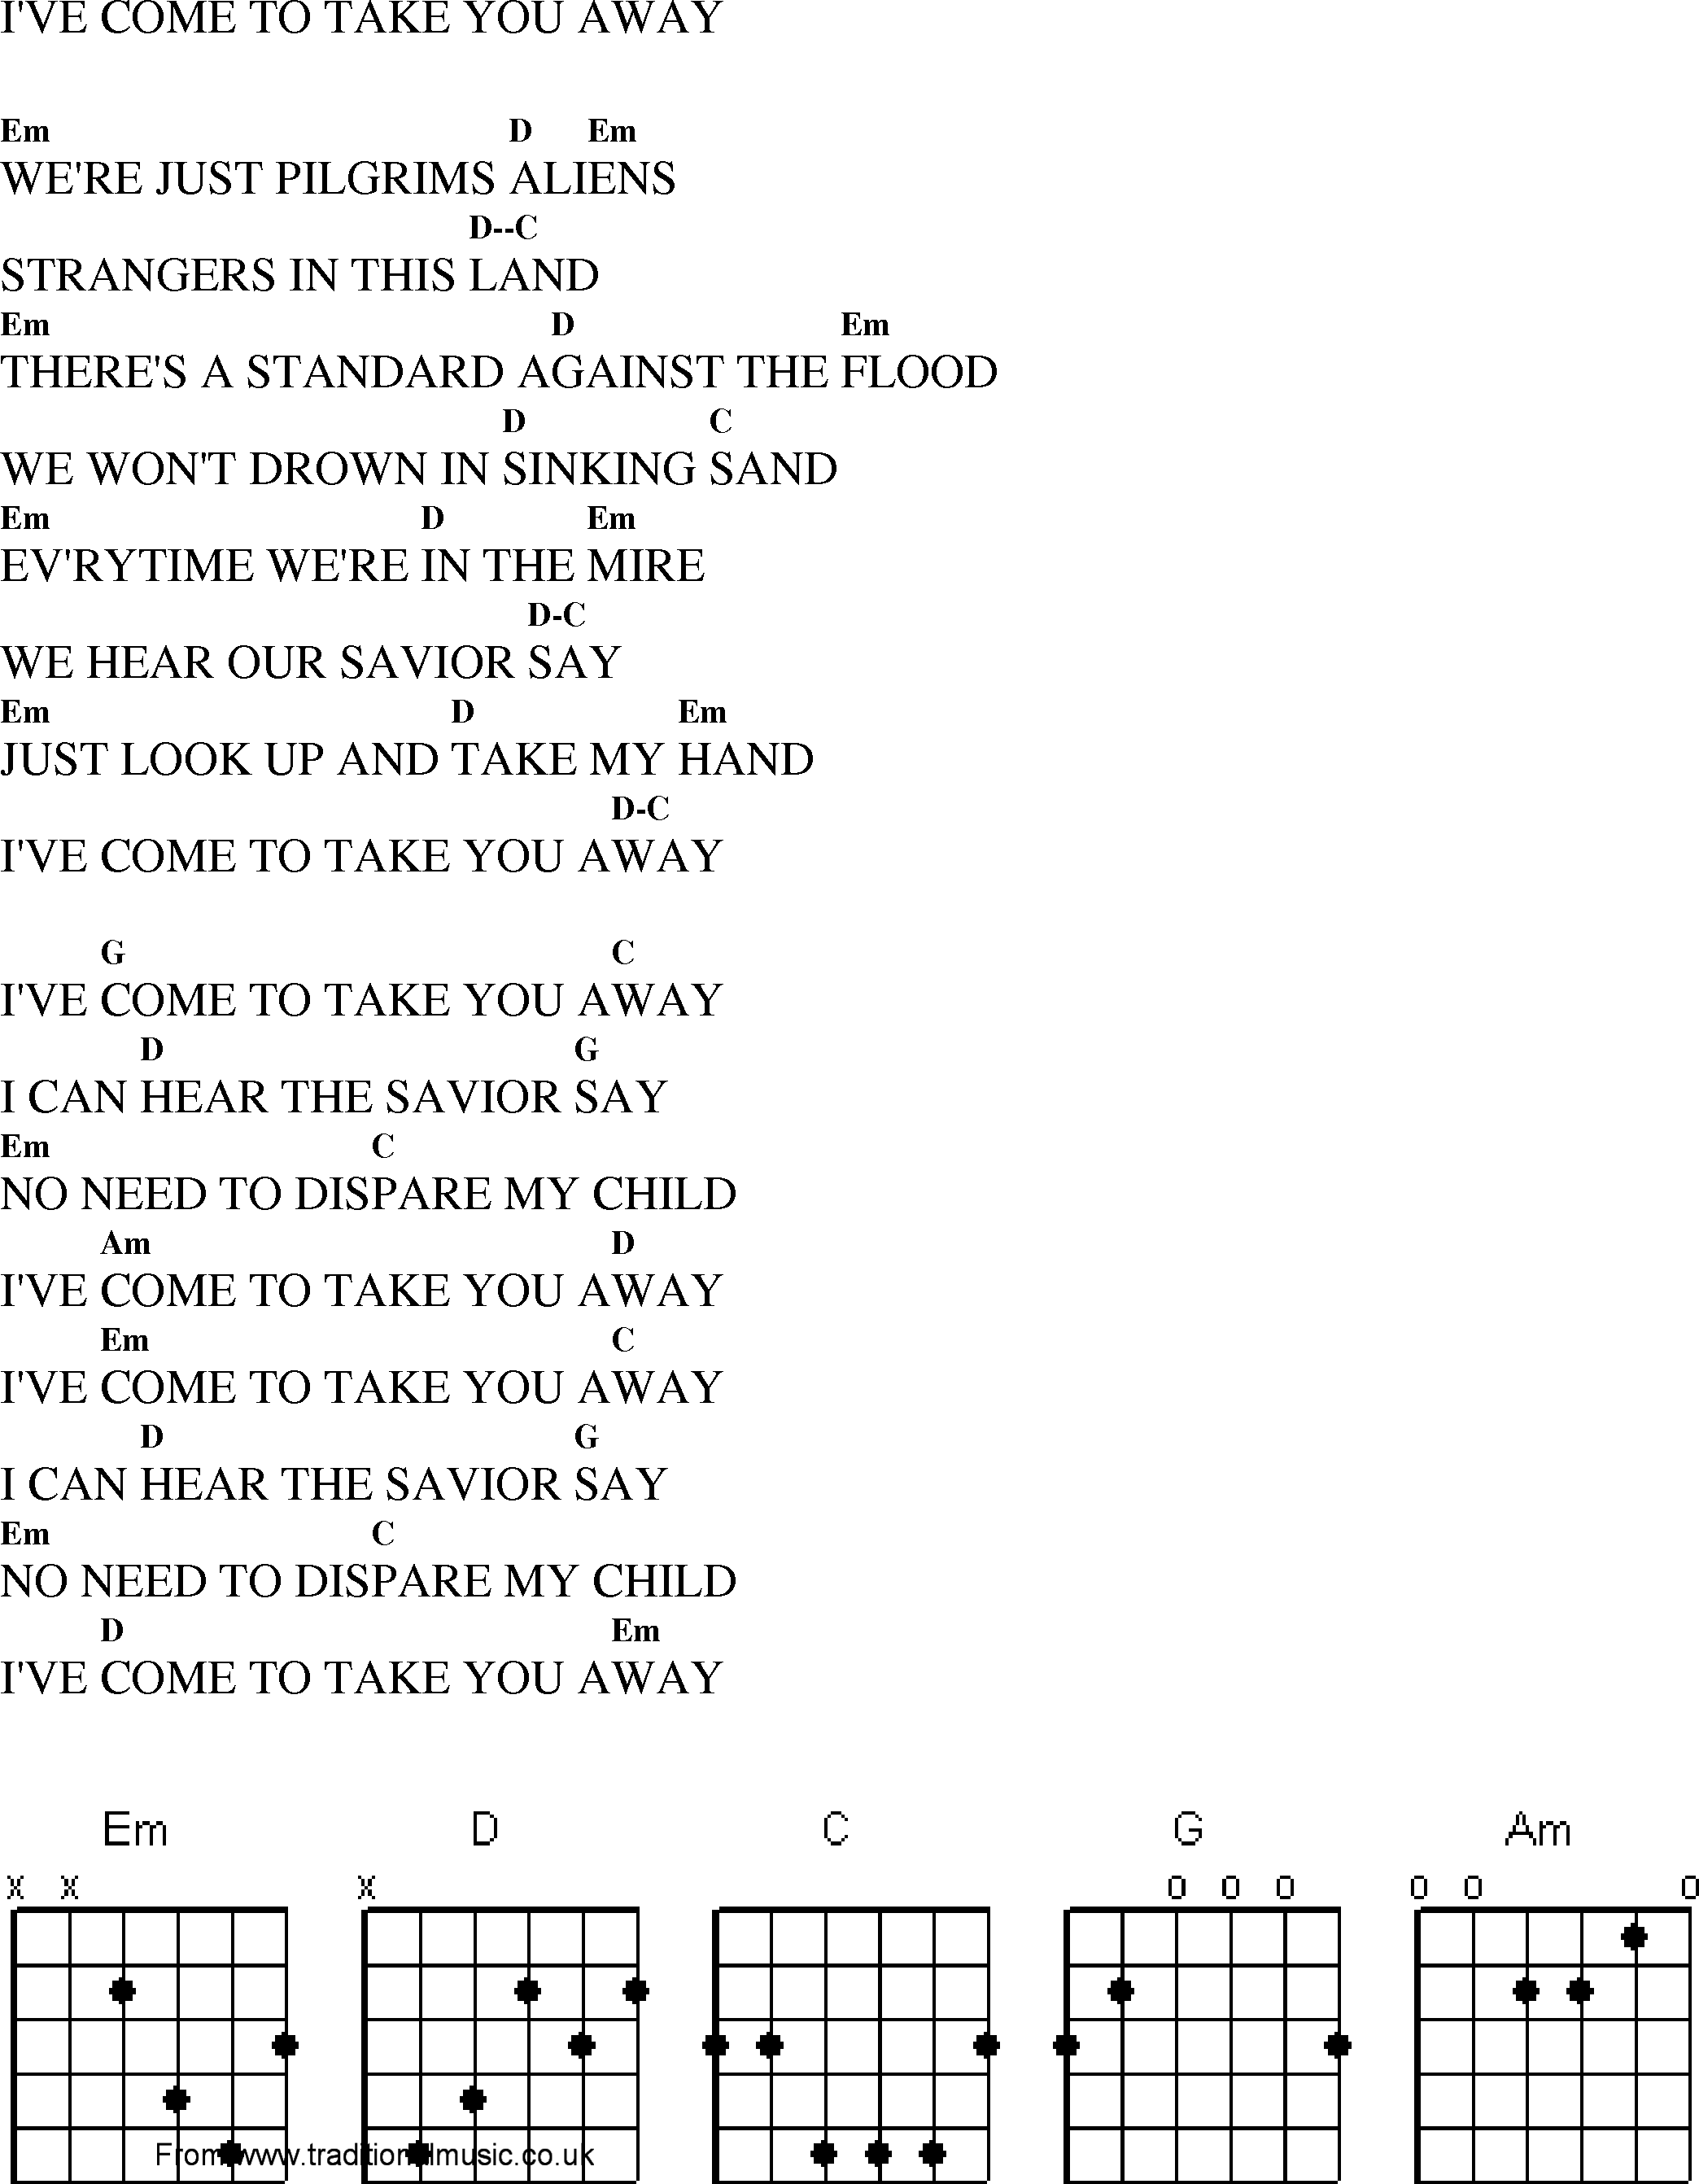 Gospel Song: ive_come_to_take_you_away, lyrics and chords.